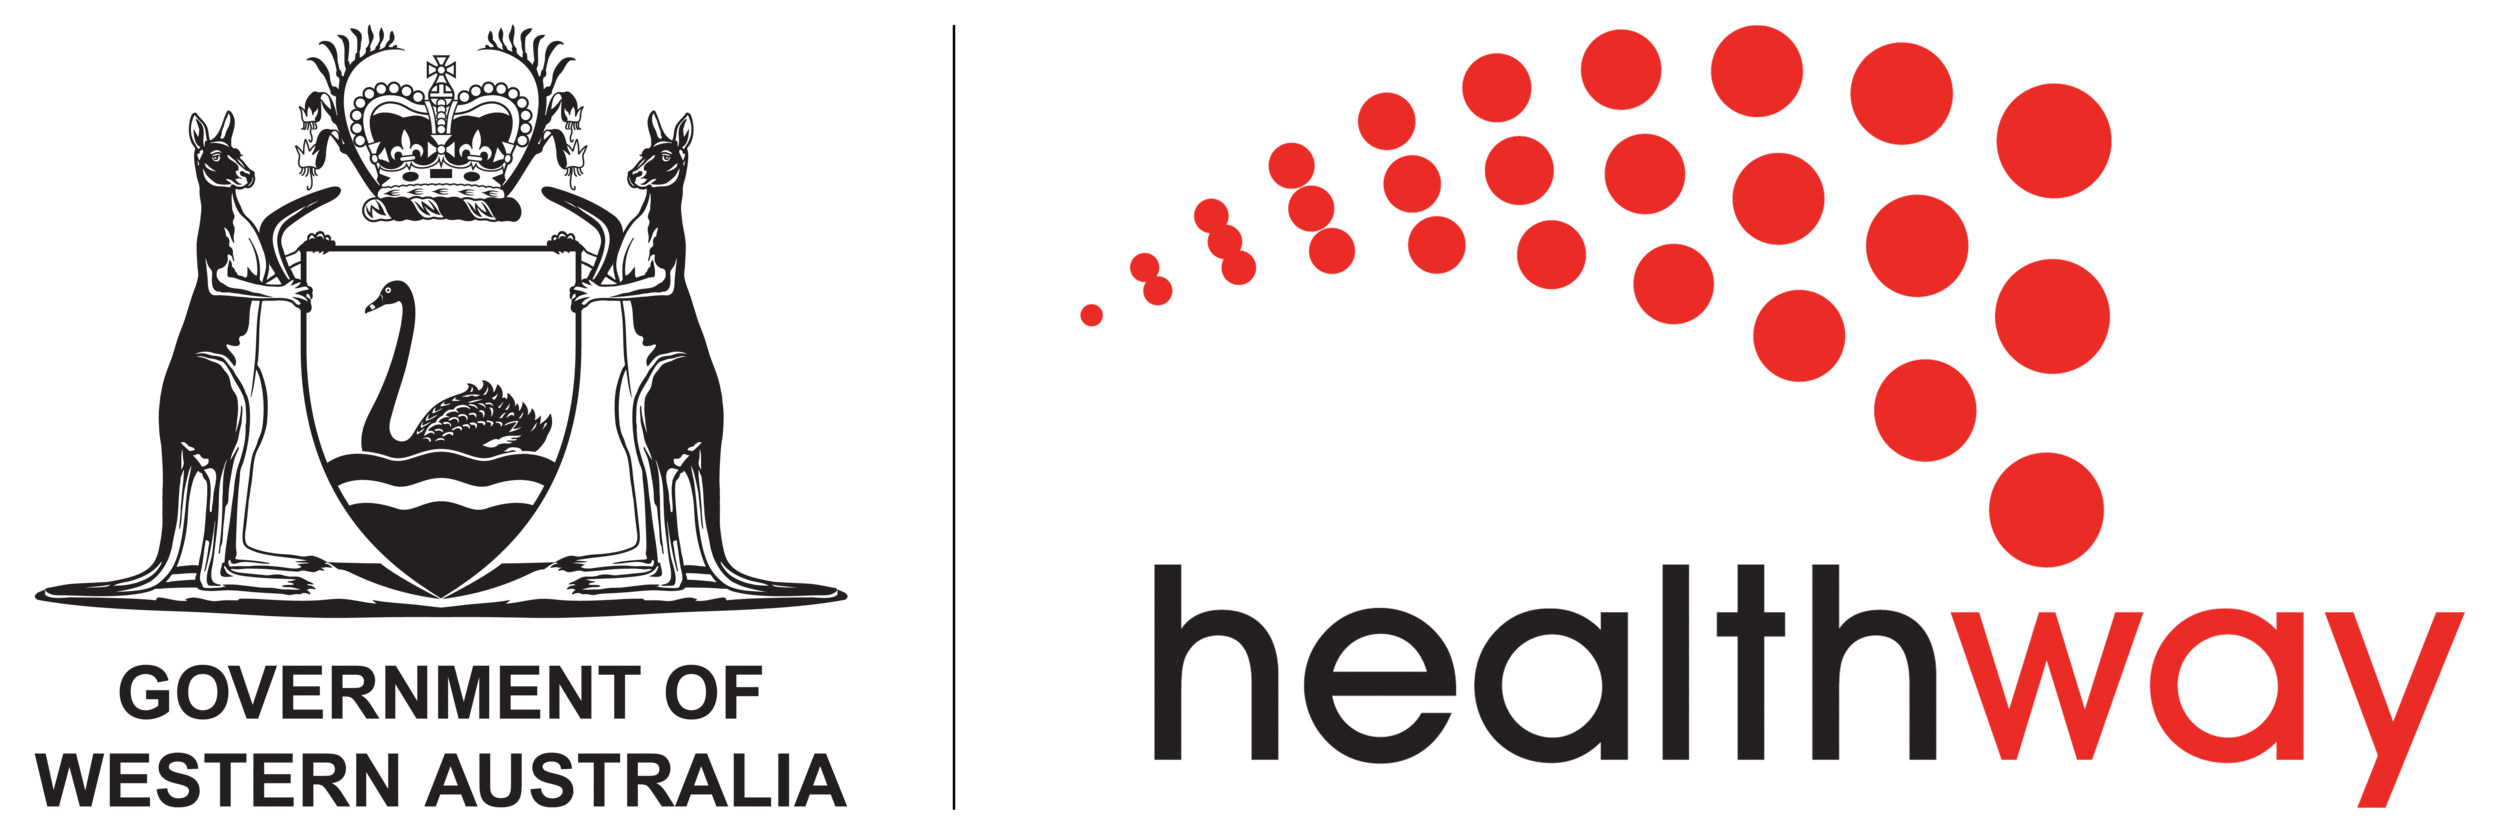 STATE COAT OF ARMS AND HEALTHWAY LOGO.png